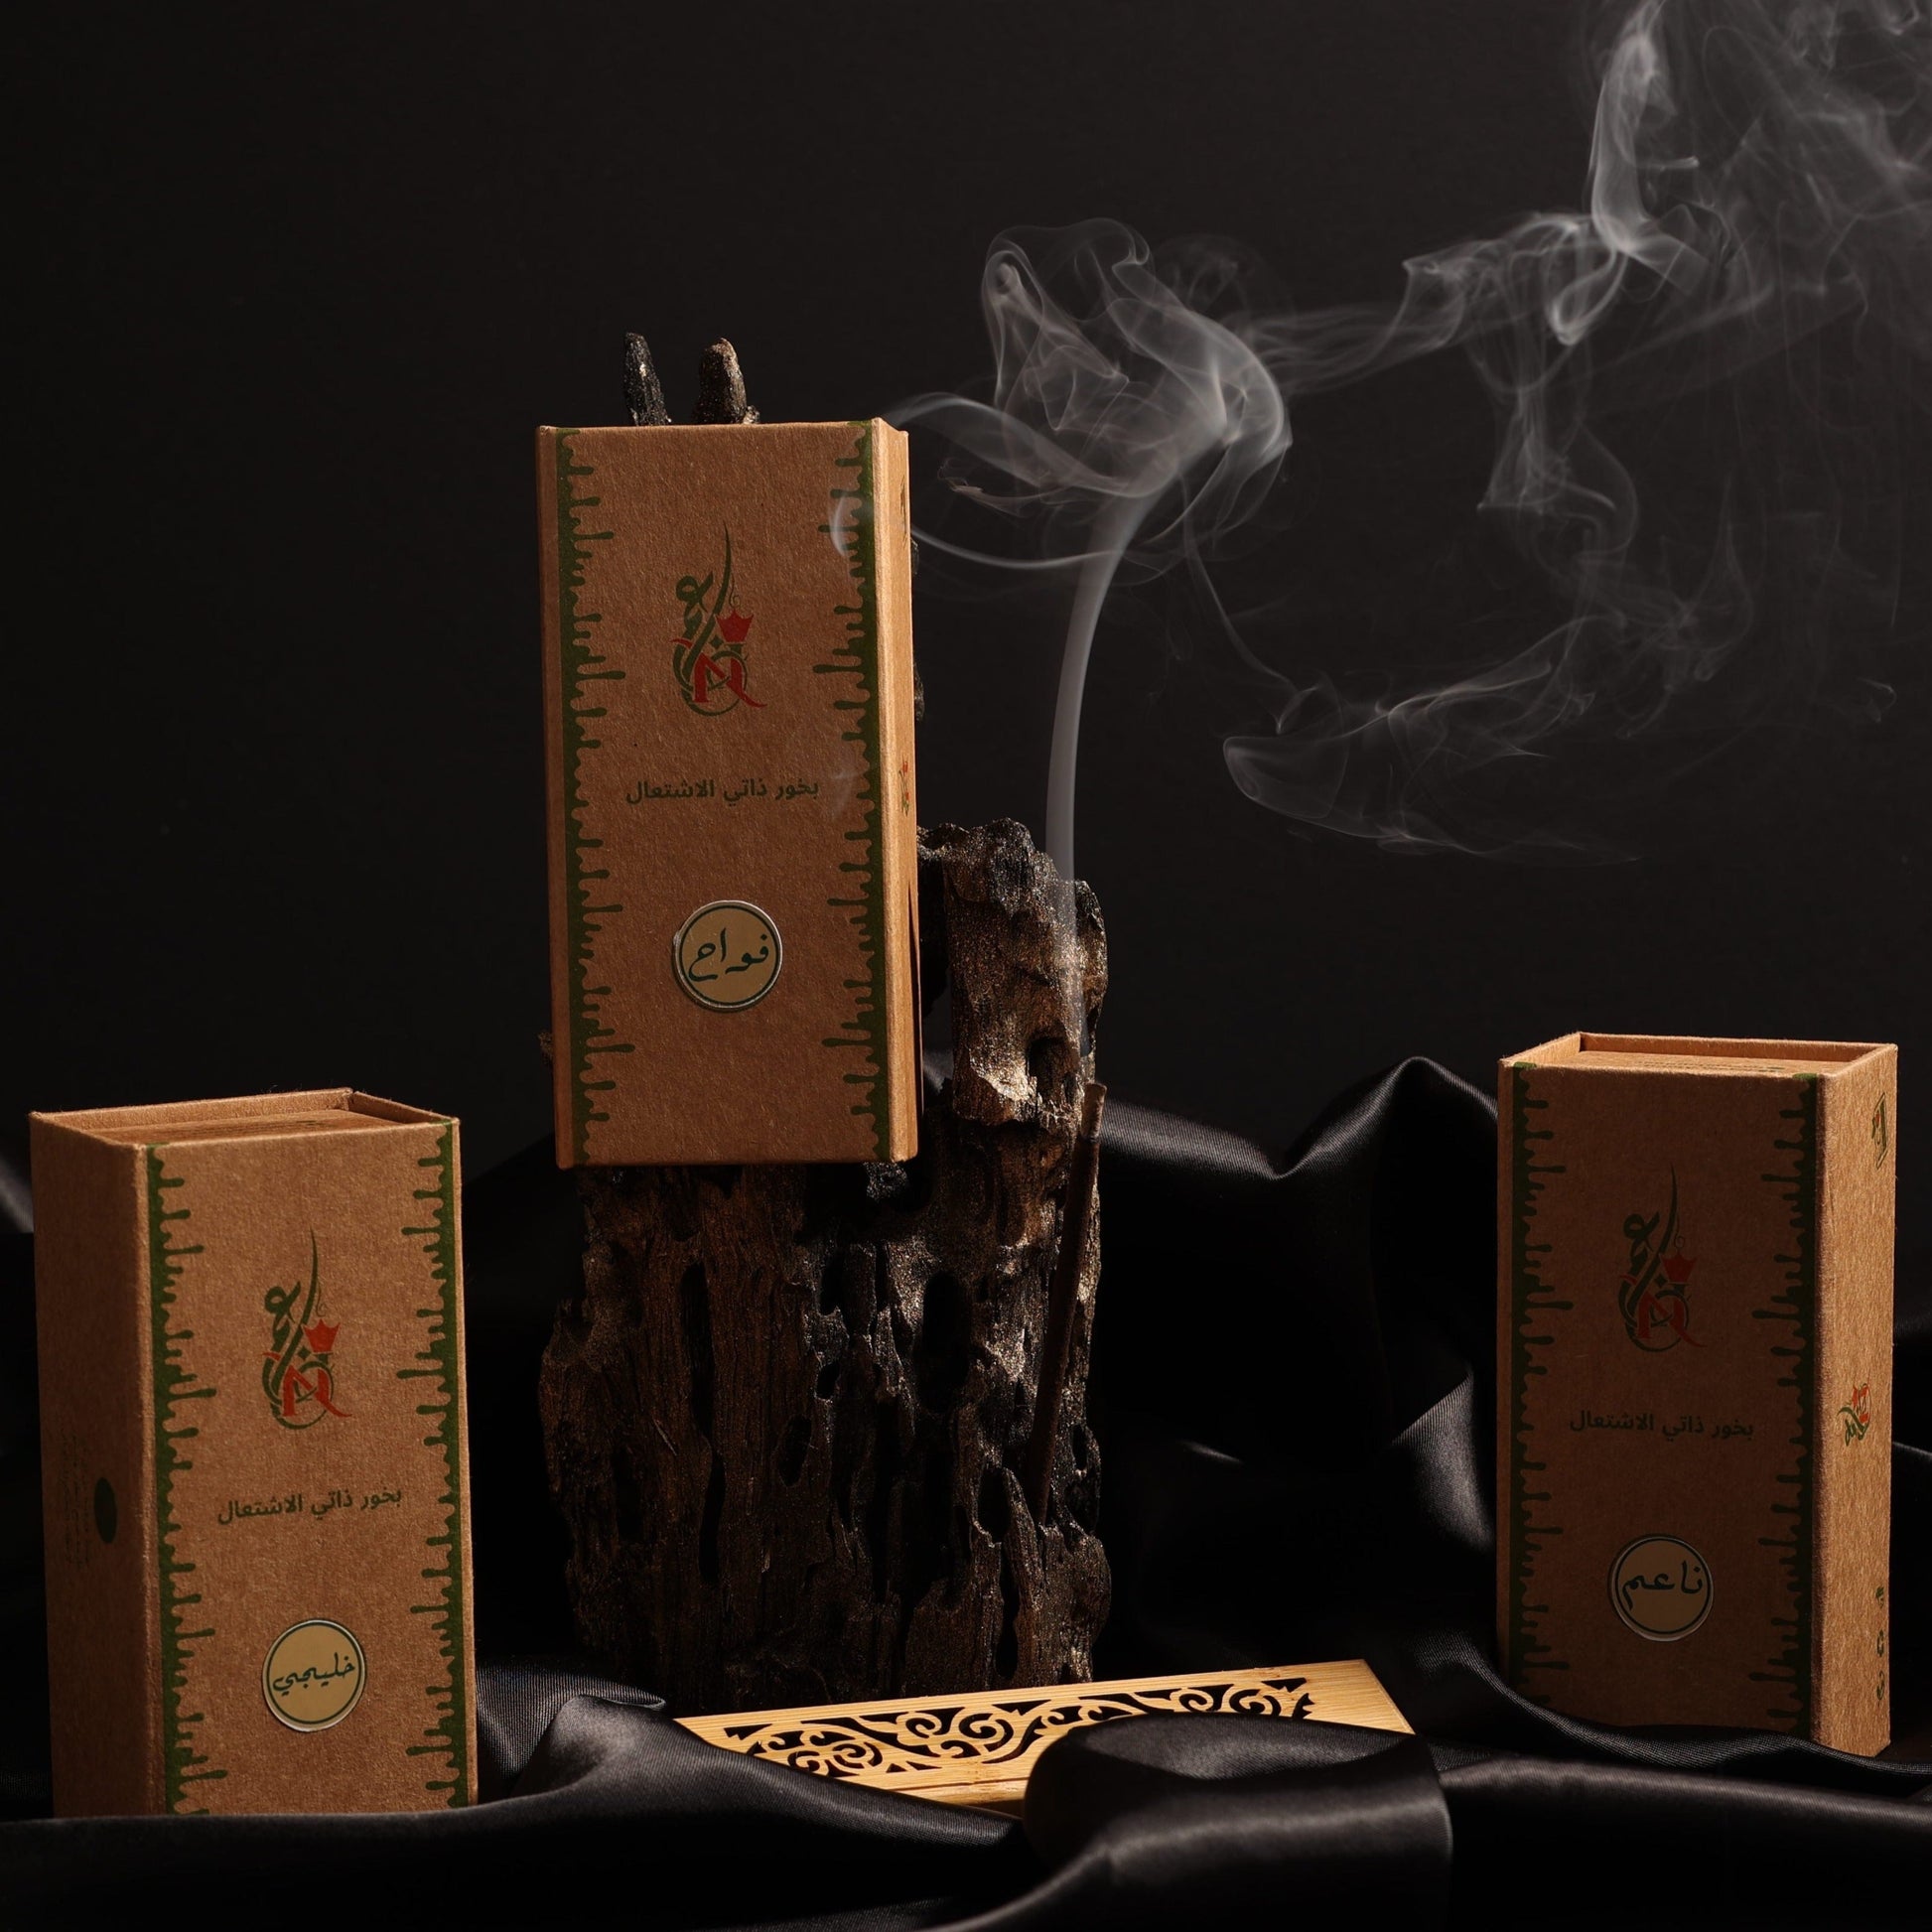 Bakhoor Harame Oud Al Nafis  Self incense with the smell of luxurious –  DAKAKEEN US